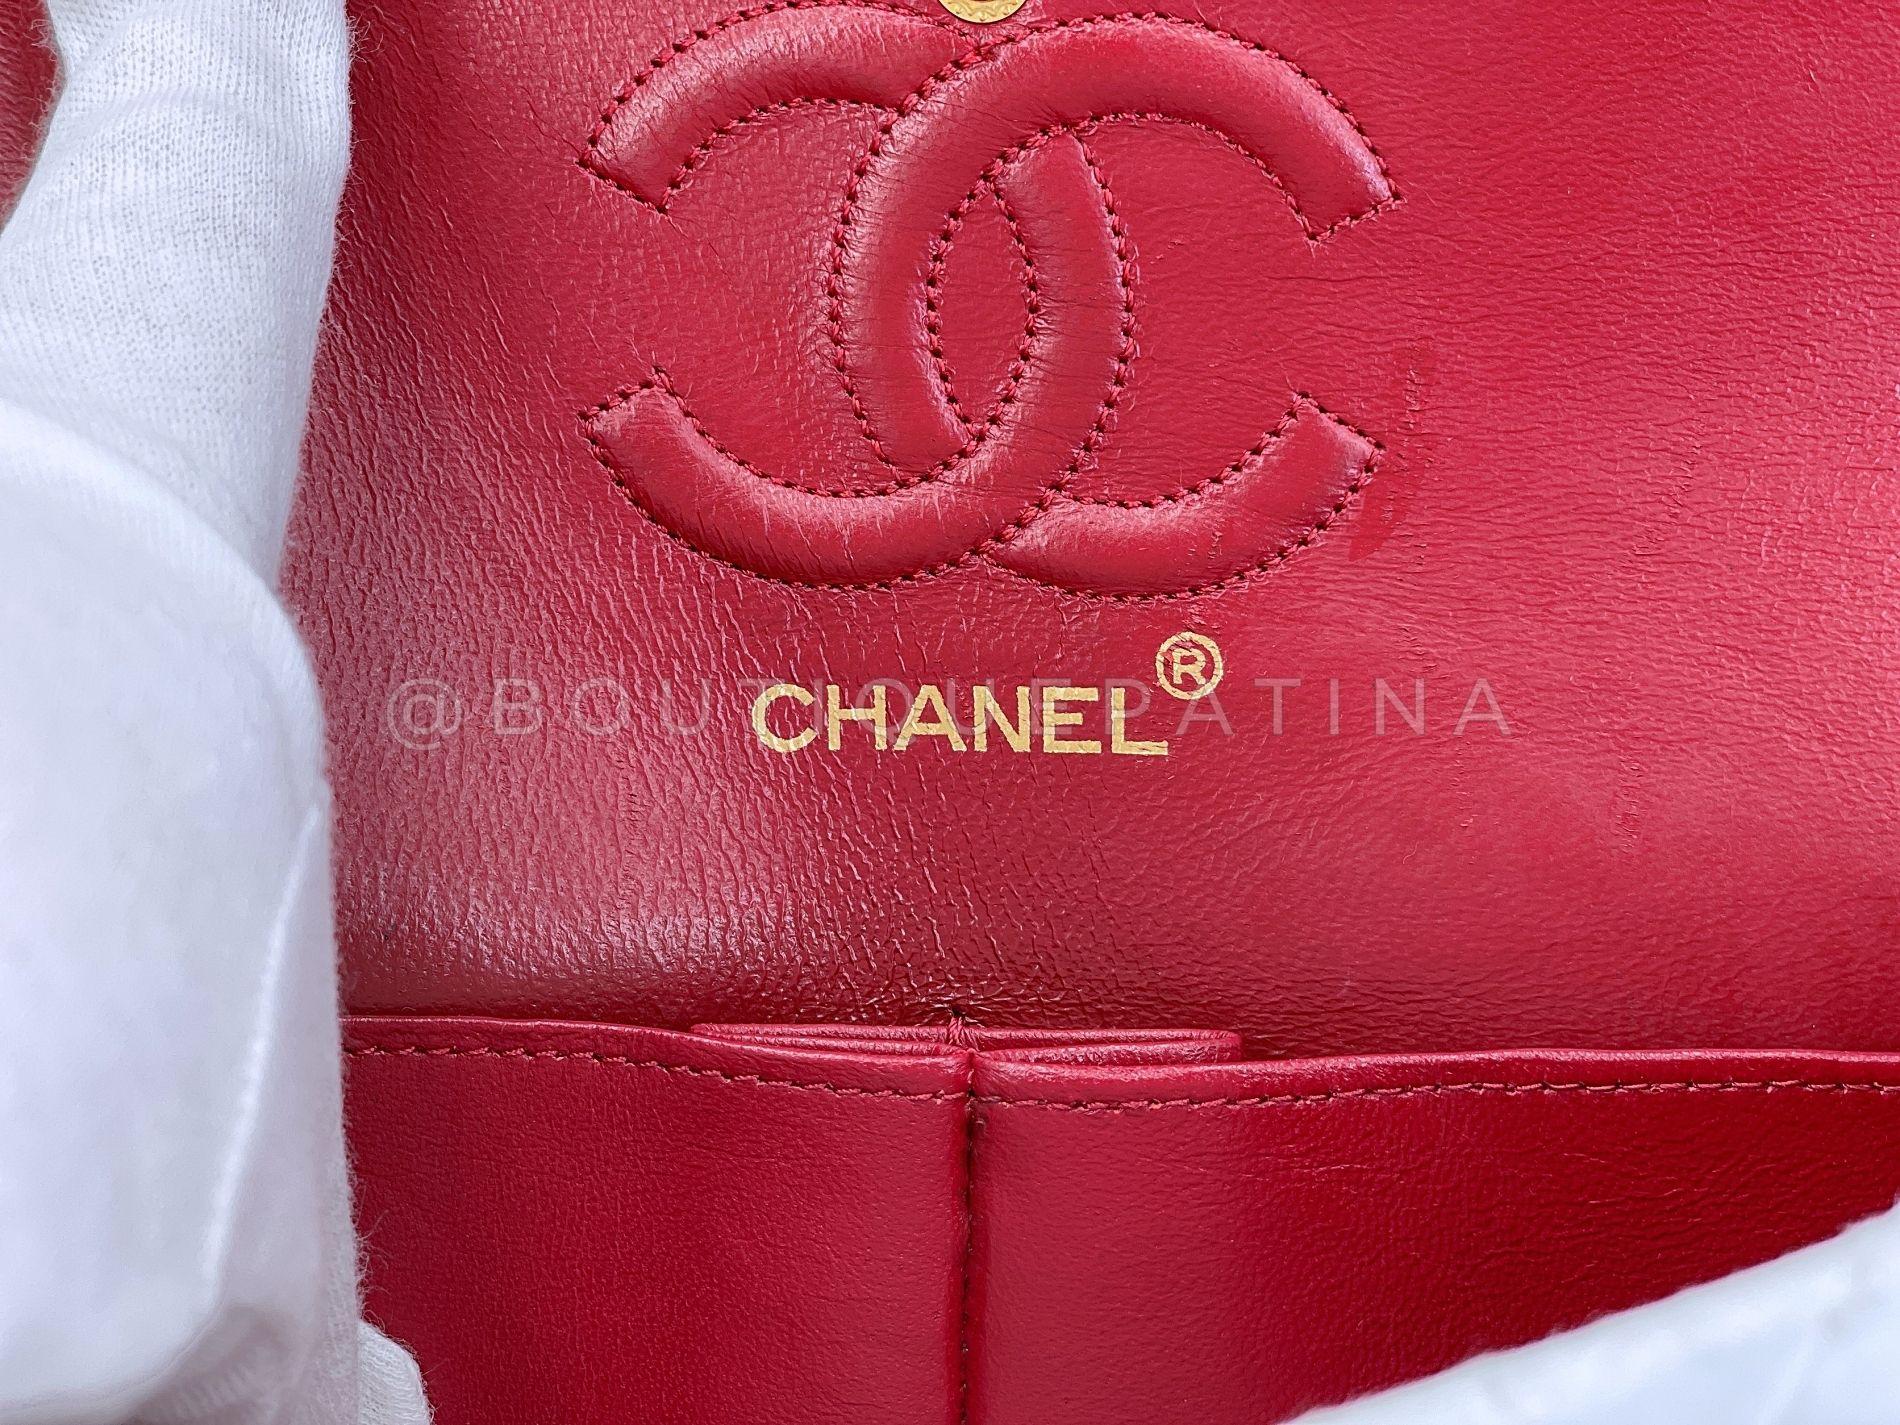 Chanel 1988 Vintage Red Small Classic Double Flap Bag 24k GHW Lambskin 68032 For Sale 6